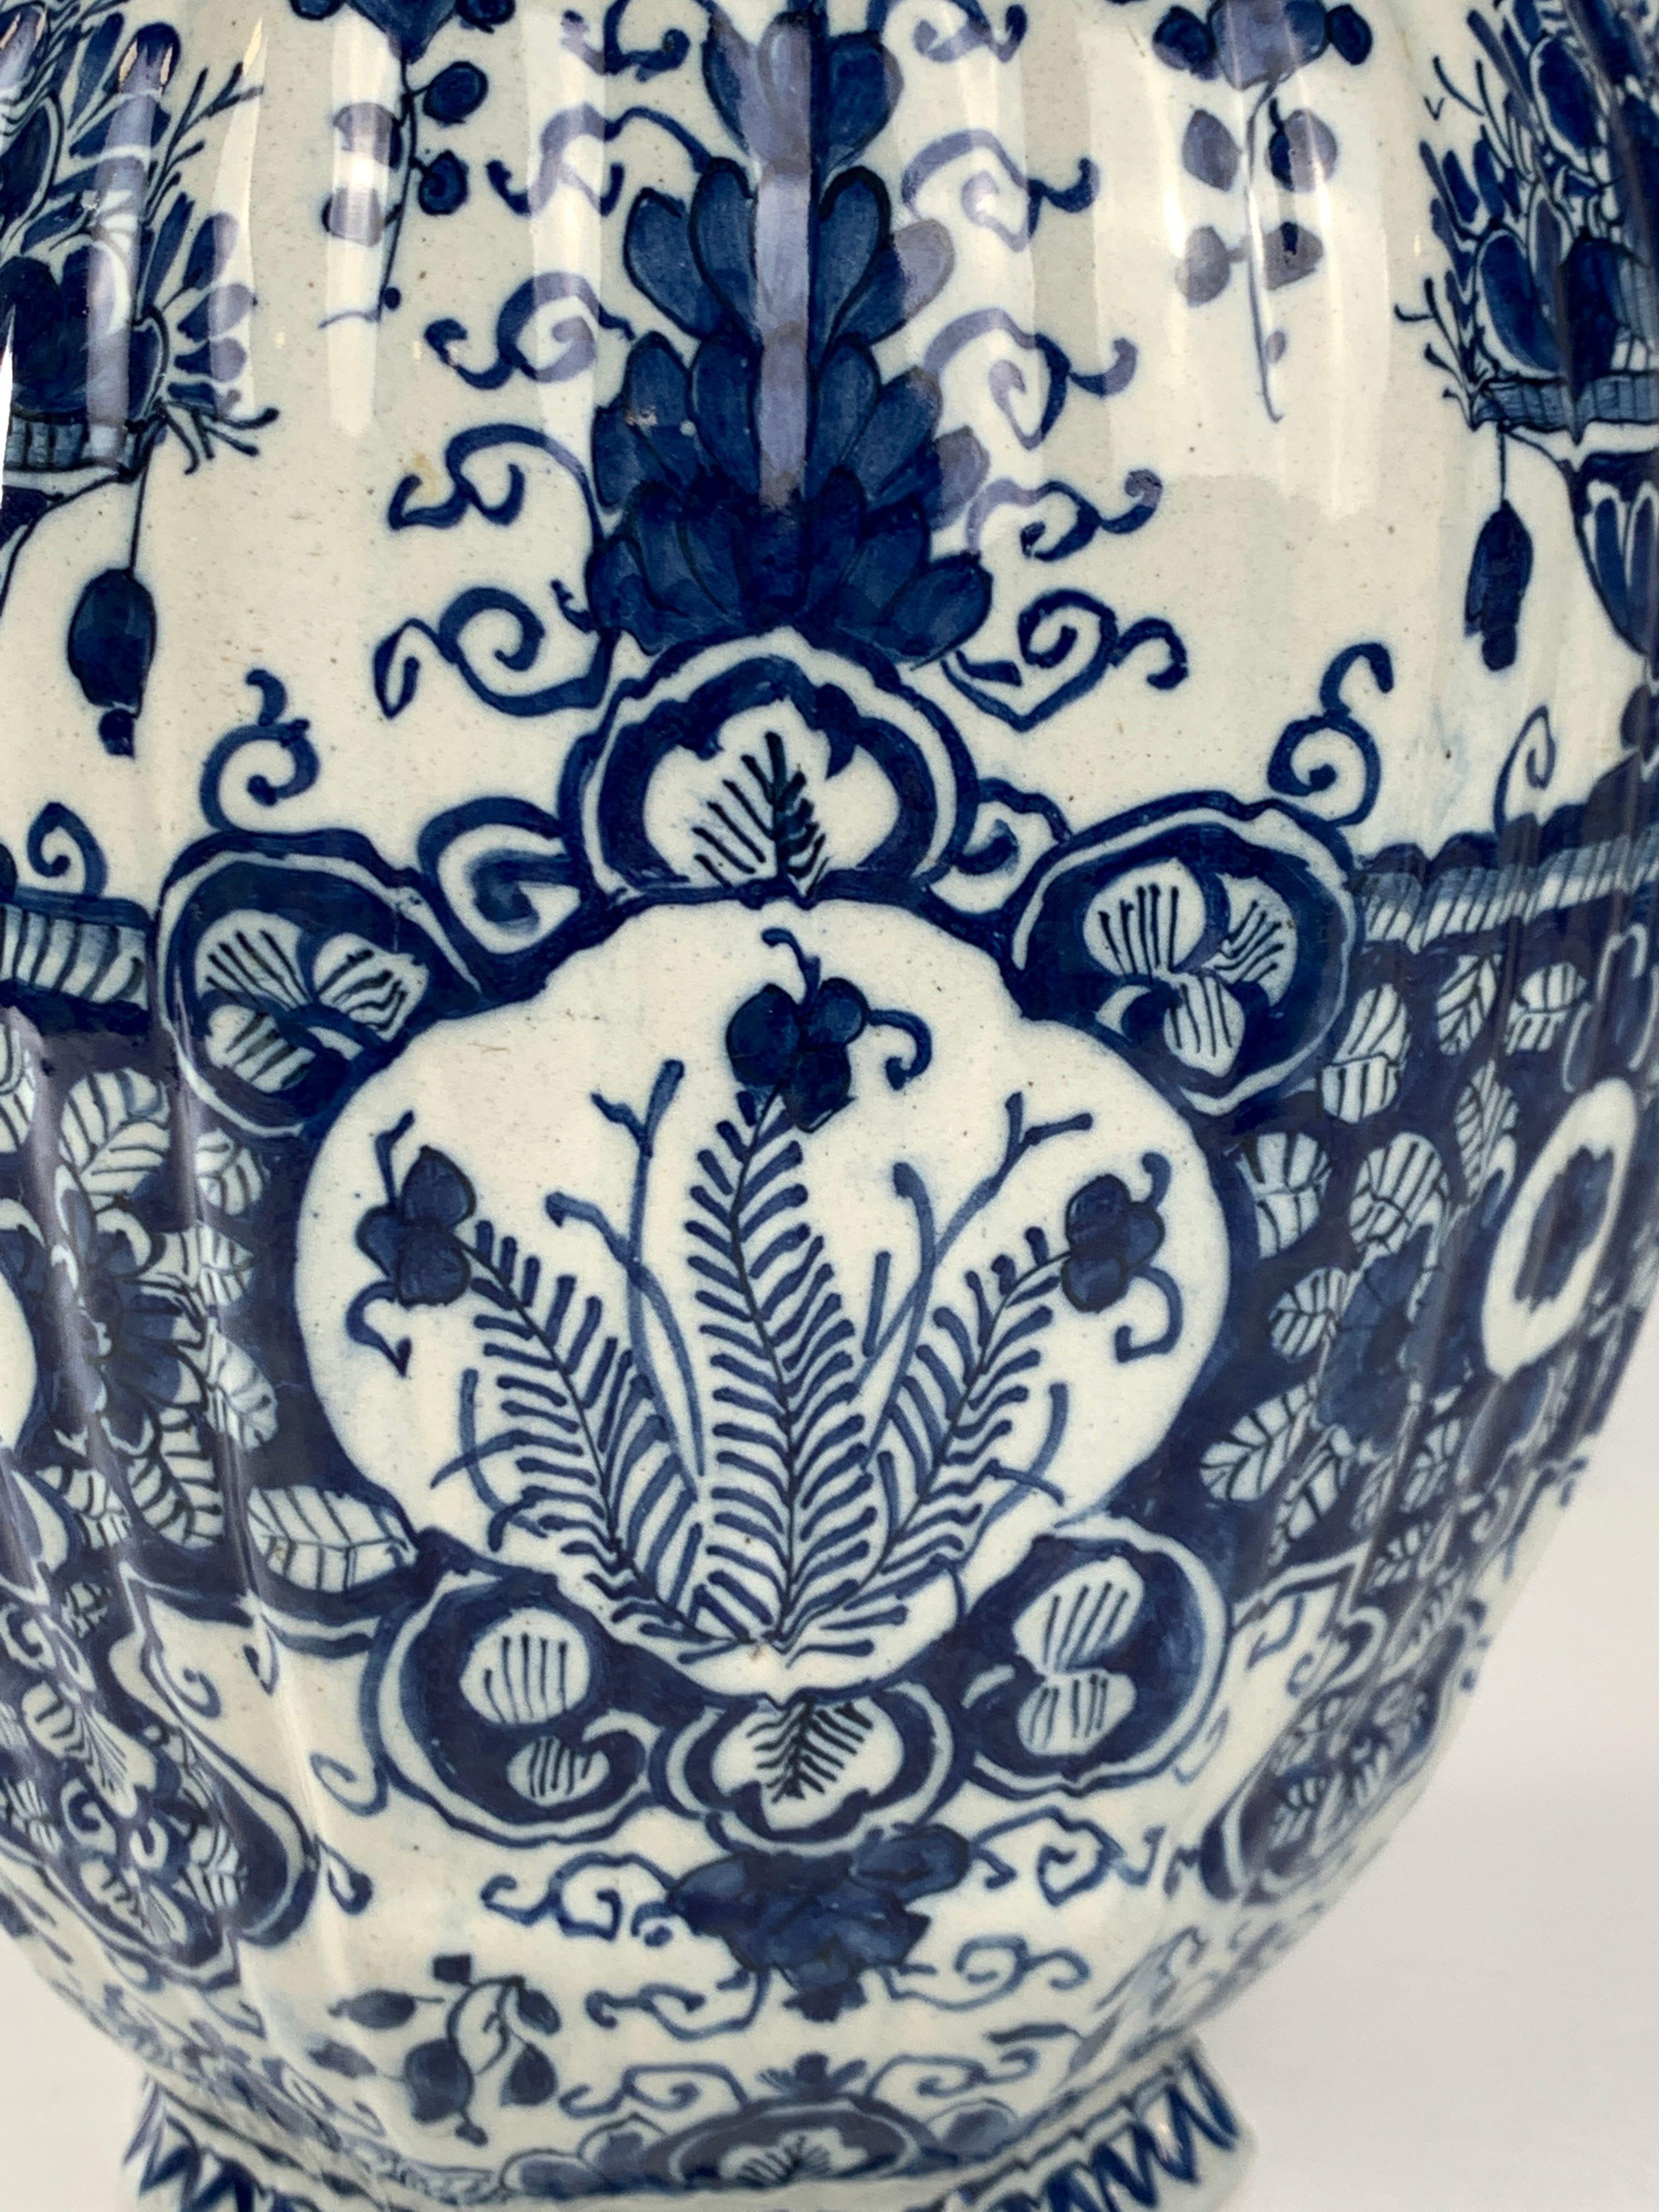 Rococo Blue and White Delft Jar Hand-Painted, Circa 1780